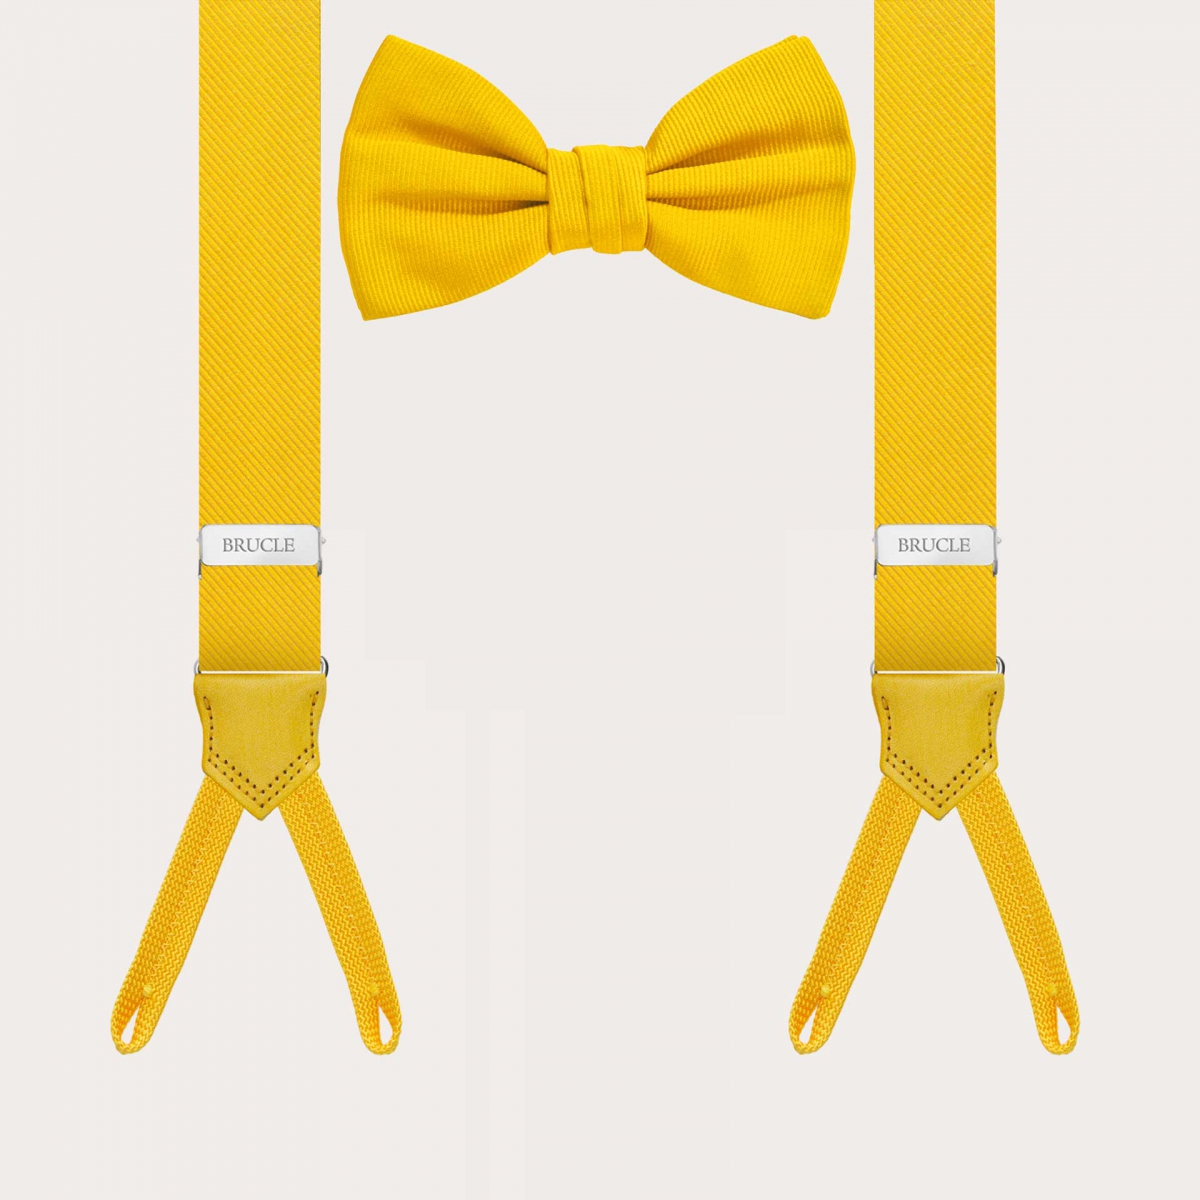 Coordinated yellow set of narrow suspenders for buttons and silk bow tie.